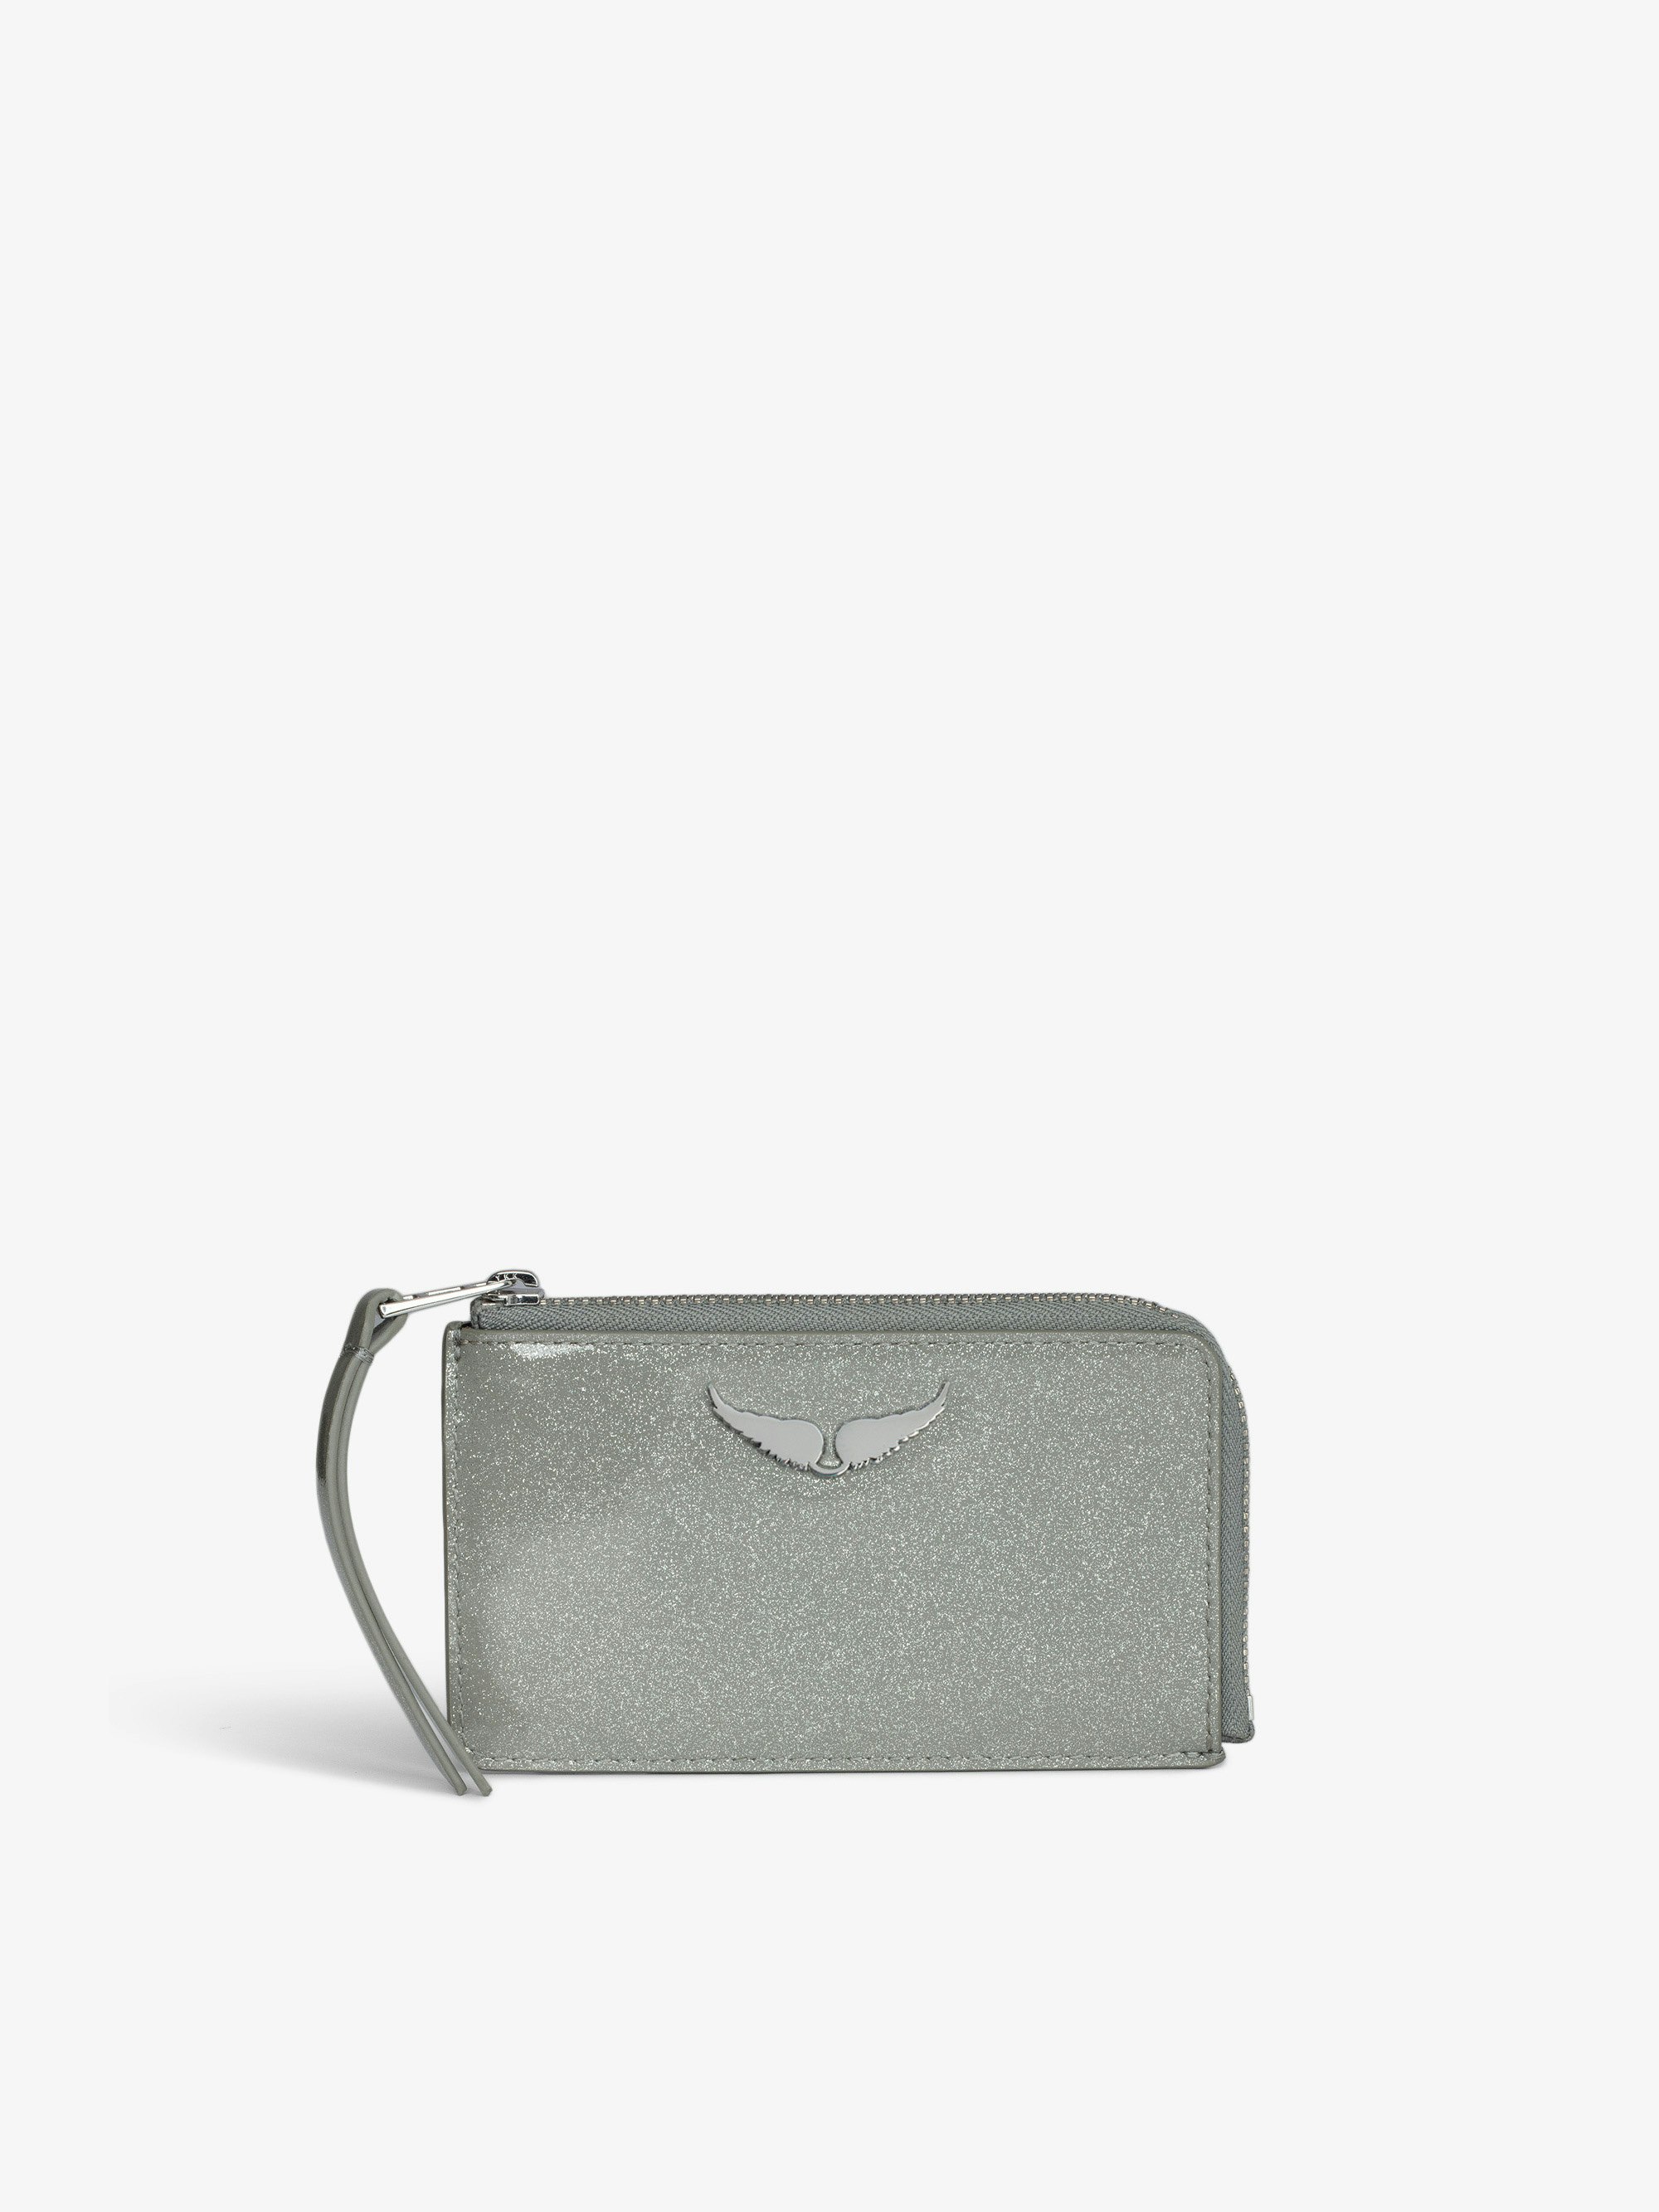 ZV Card  Infinity Patent Card Holder - Silver glitter patent leather card holder with wings charm.